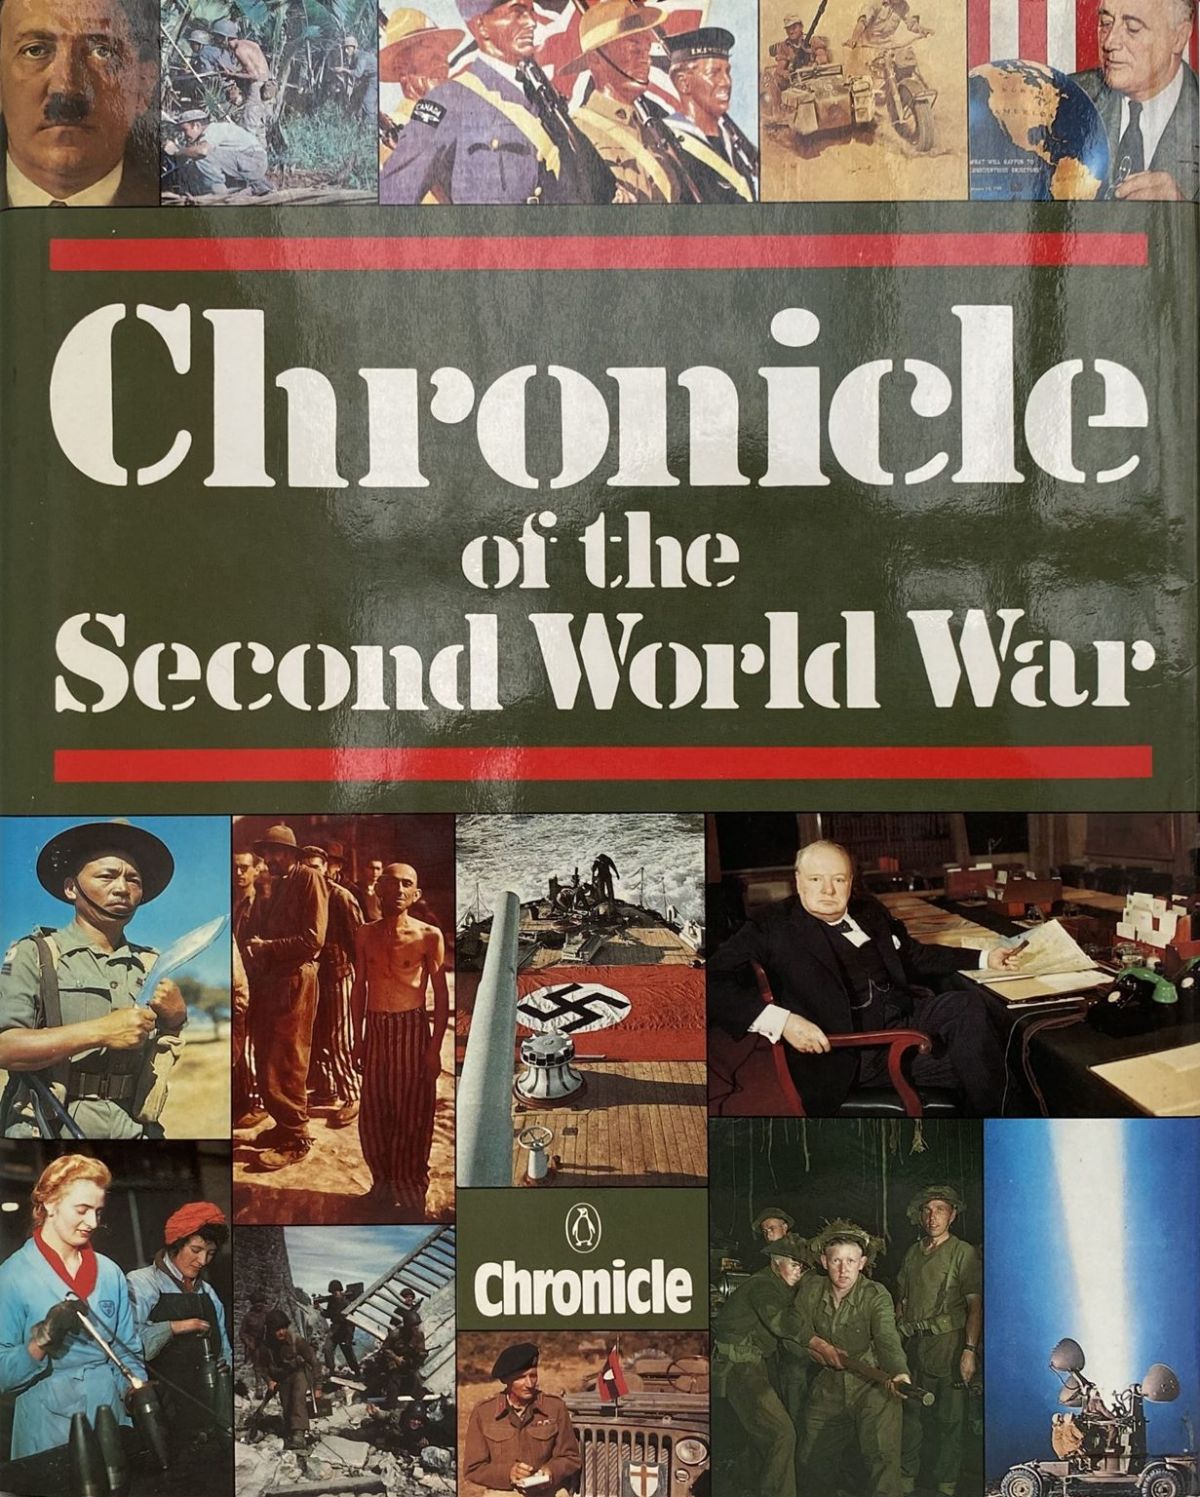 Chronicle of the Second World War